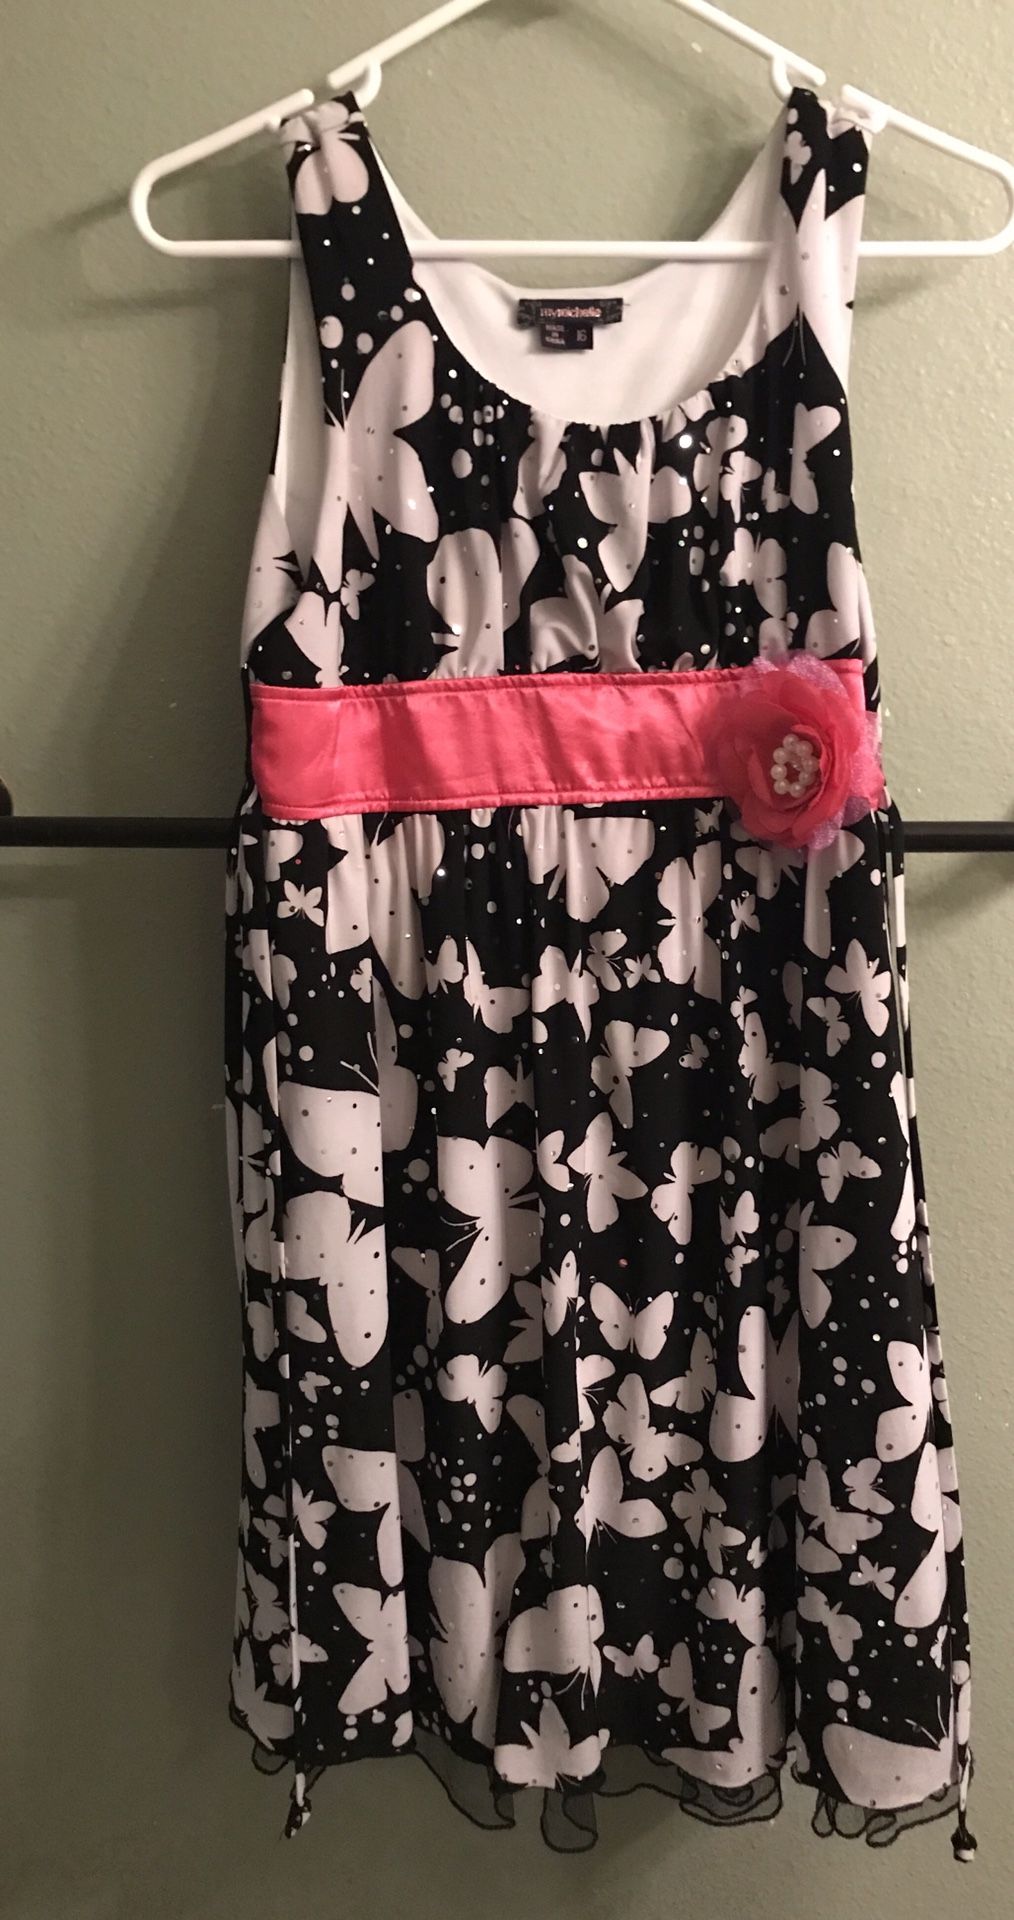 Girl clothes dress size 16